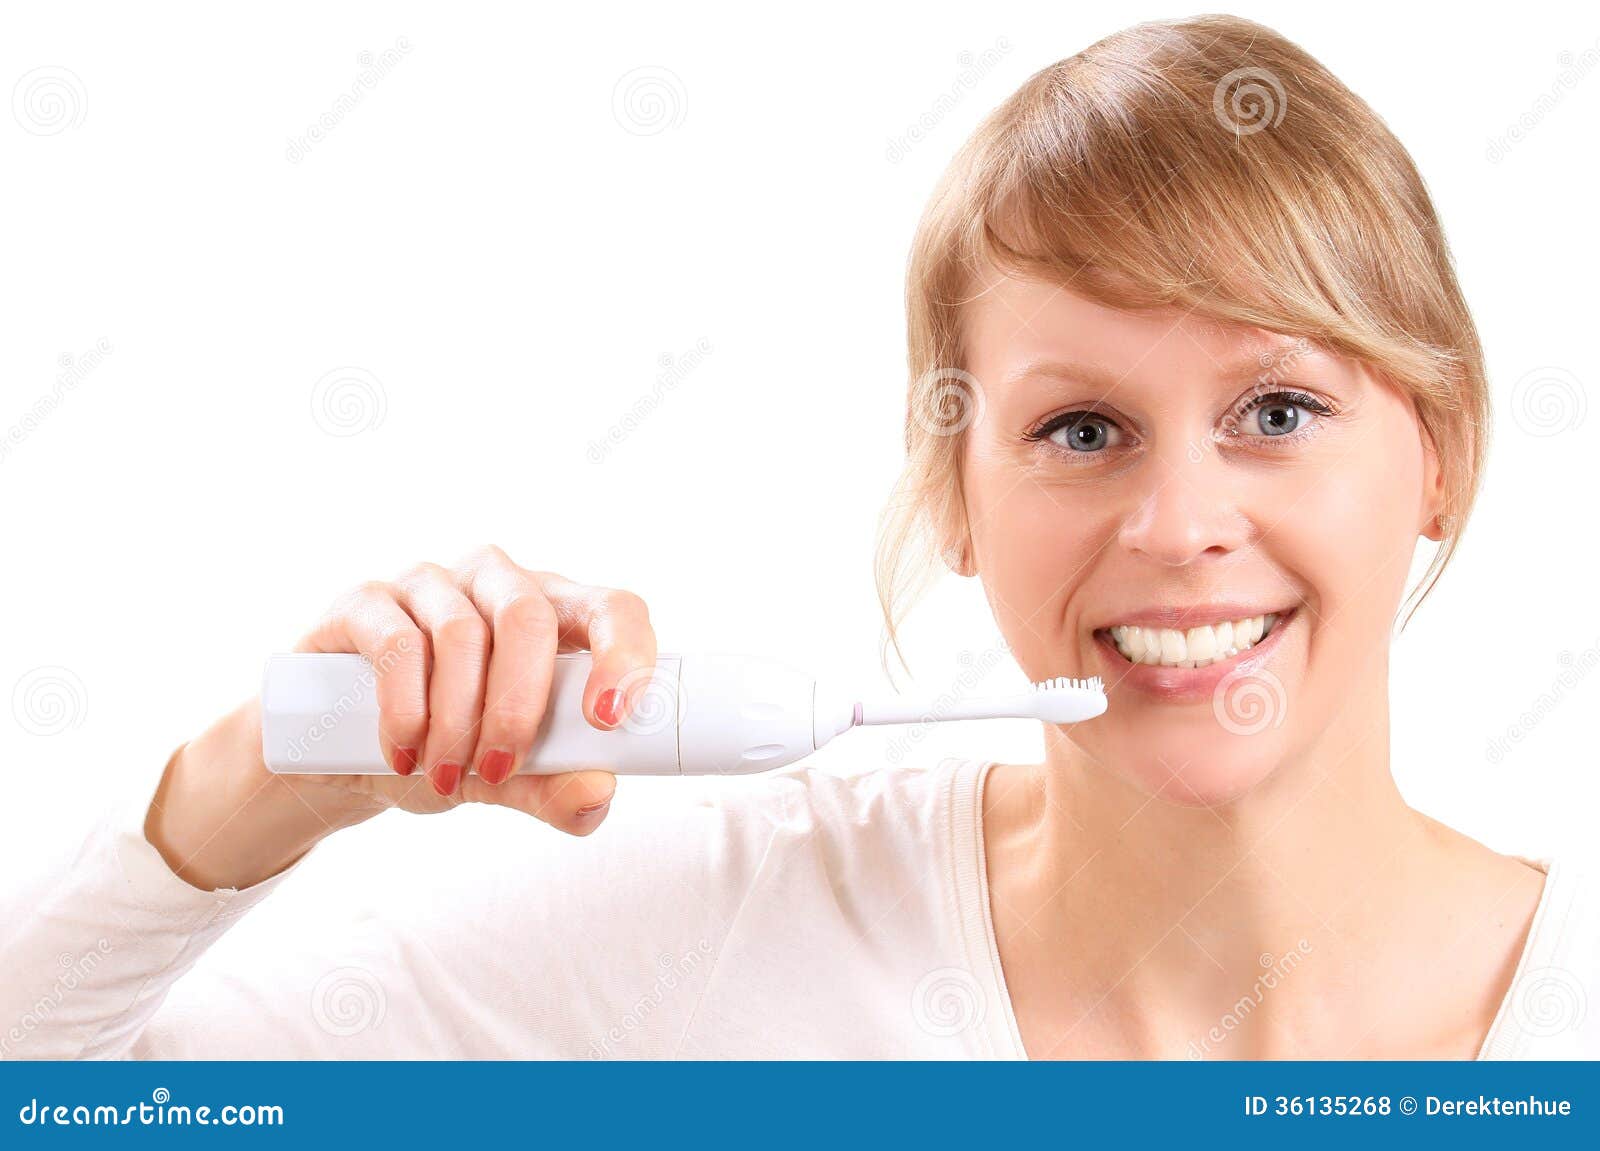 dental-care-image-woman-products-bright-white-background-36135268.jpg